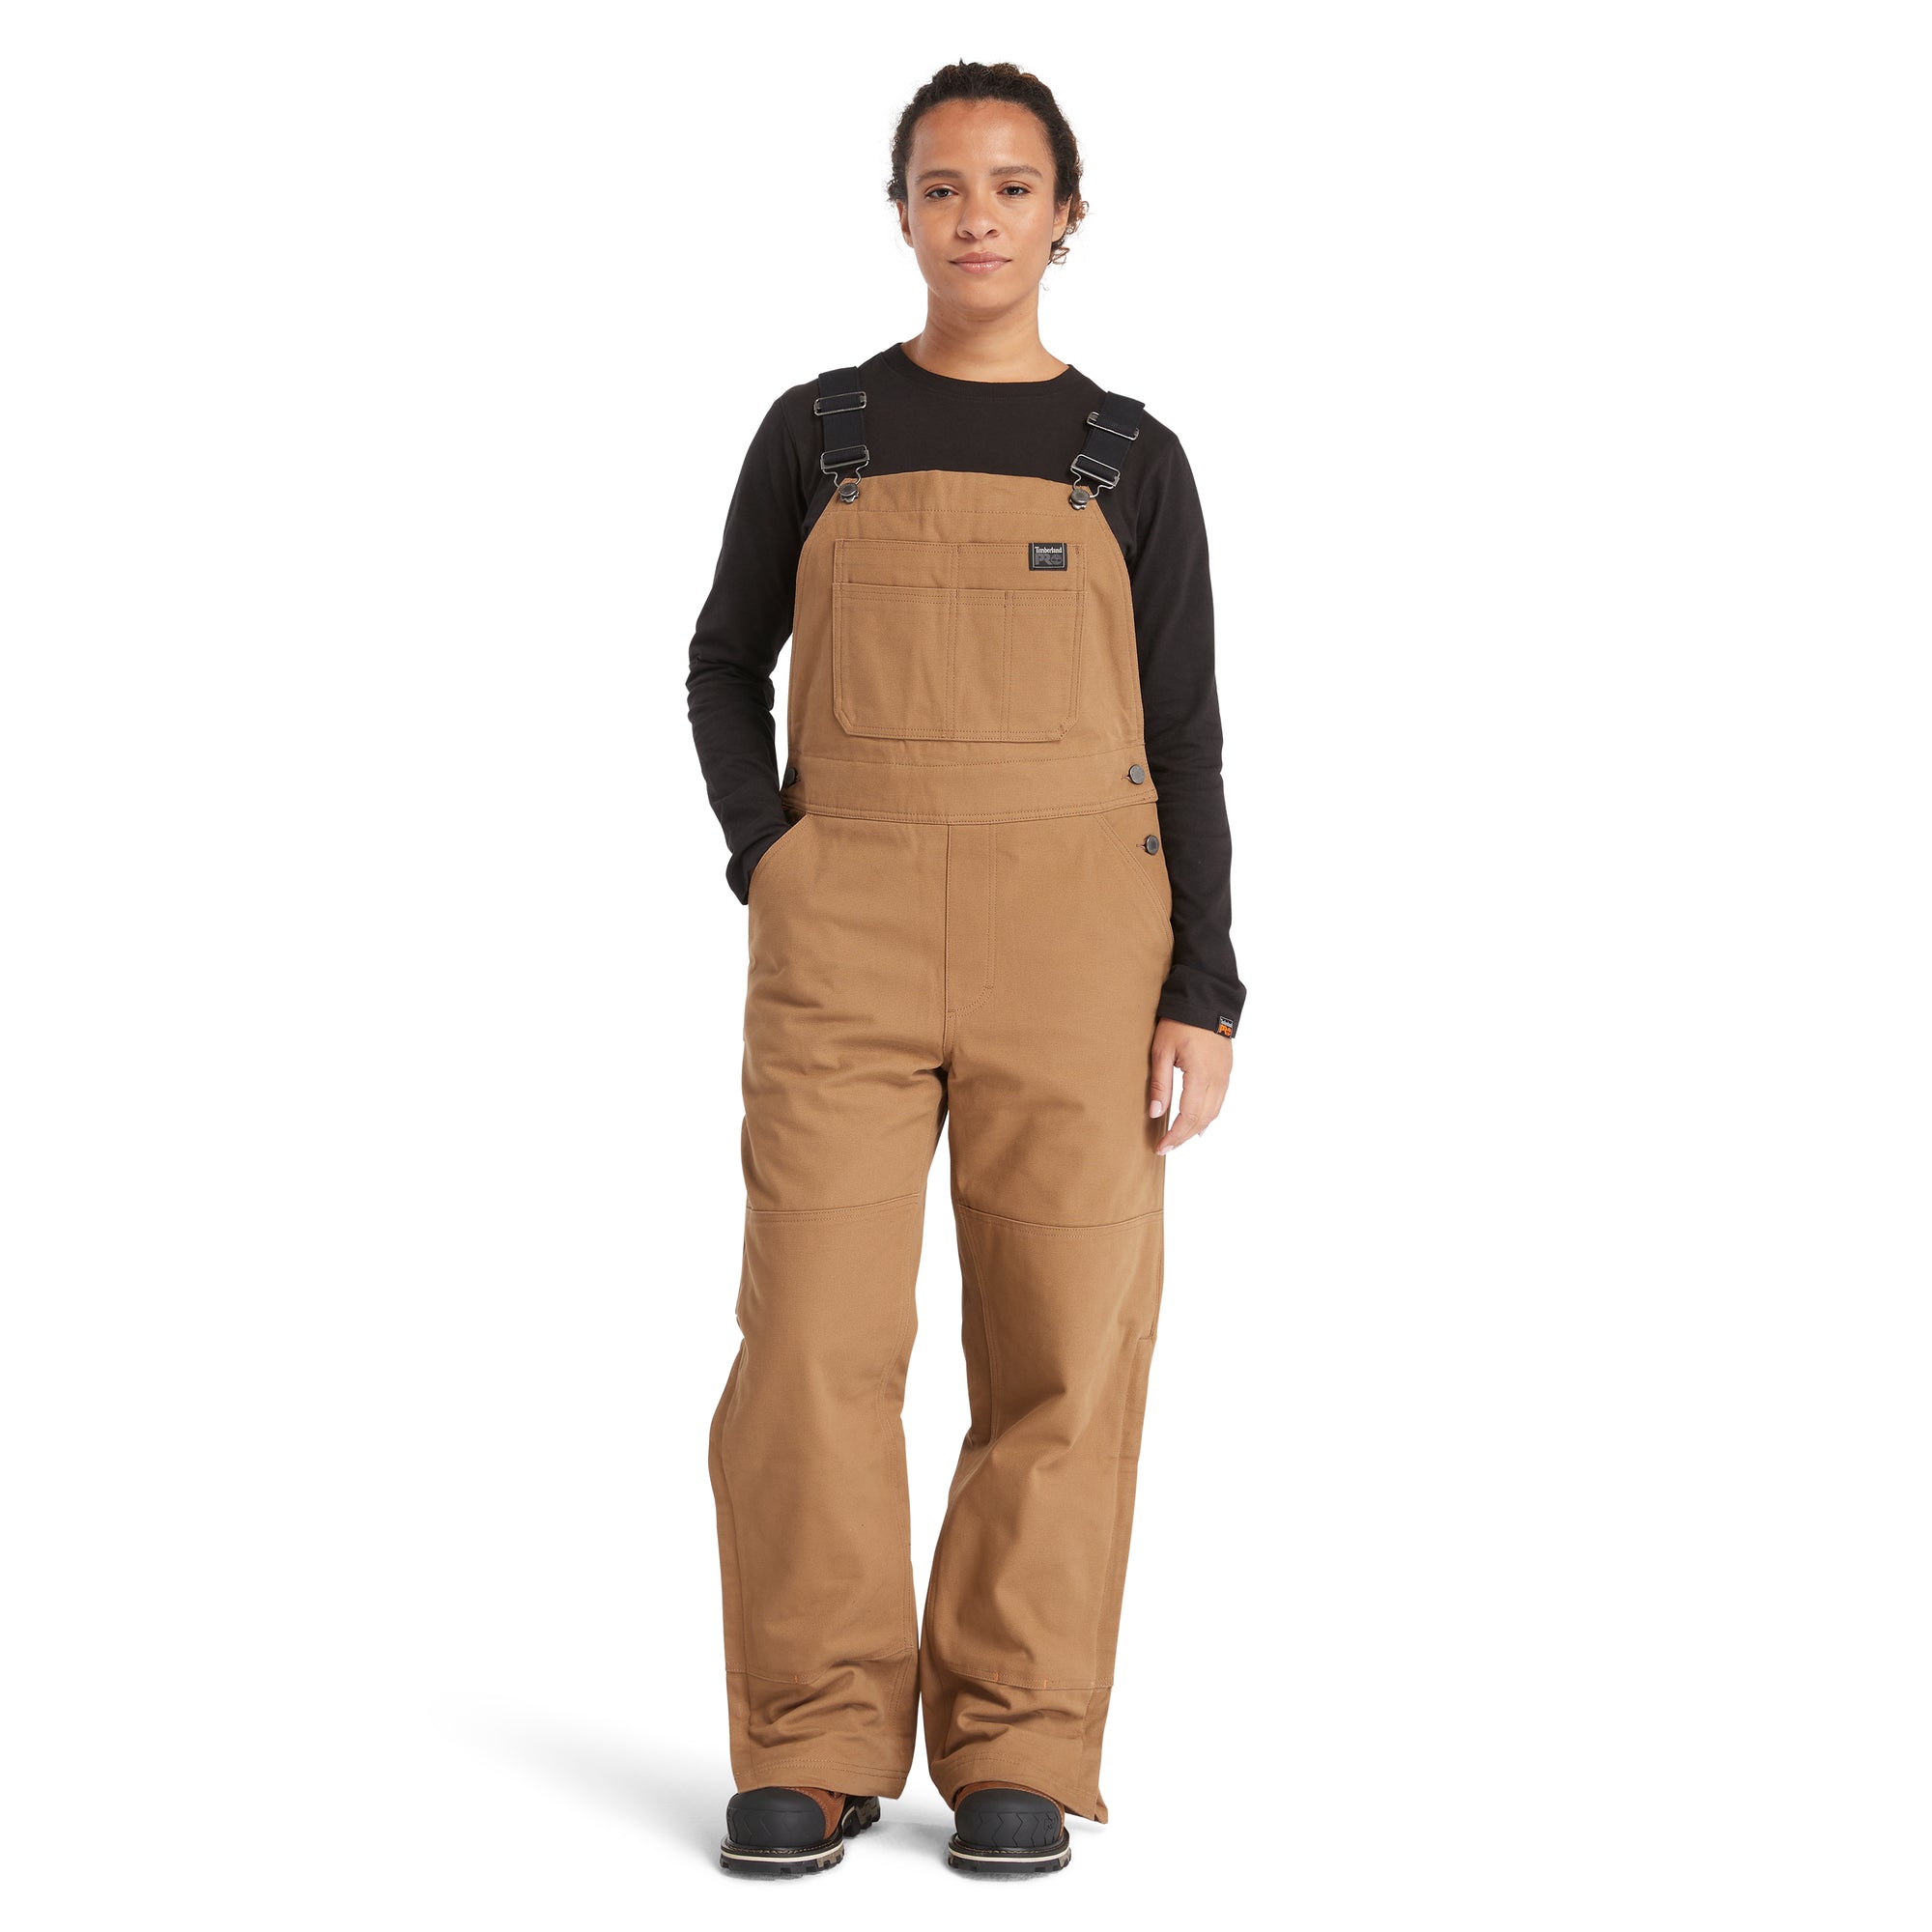 Timberland PRO Women's Gritman Insulated Double-Front Bib Overall - Work World - Workwear, Work Boots, Safety Gear